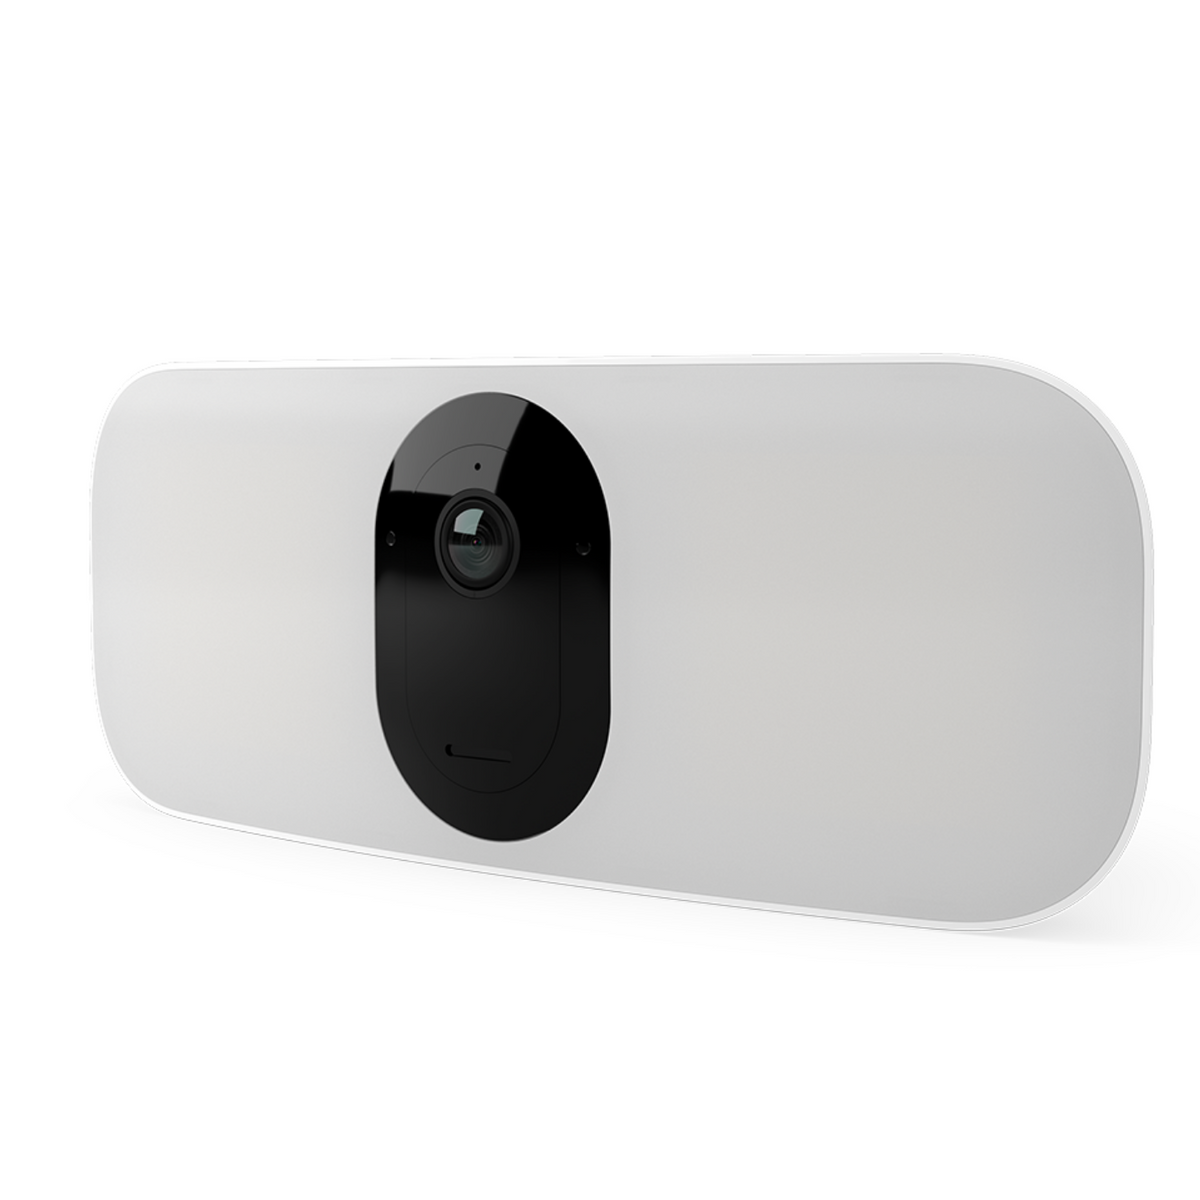 Arlo Pro 3 Floodlight Outdoor Security Camera - White | FB1001100EUS from Arlo - DID Electrical